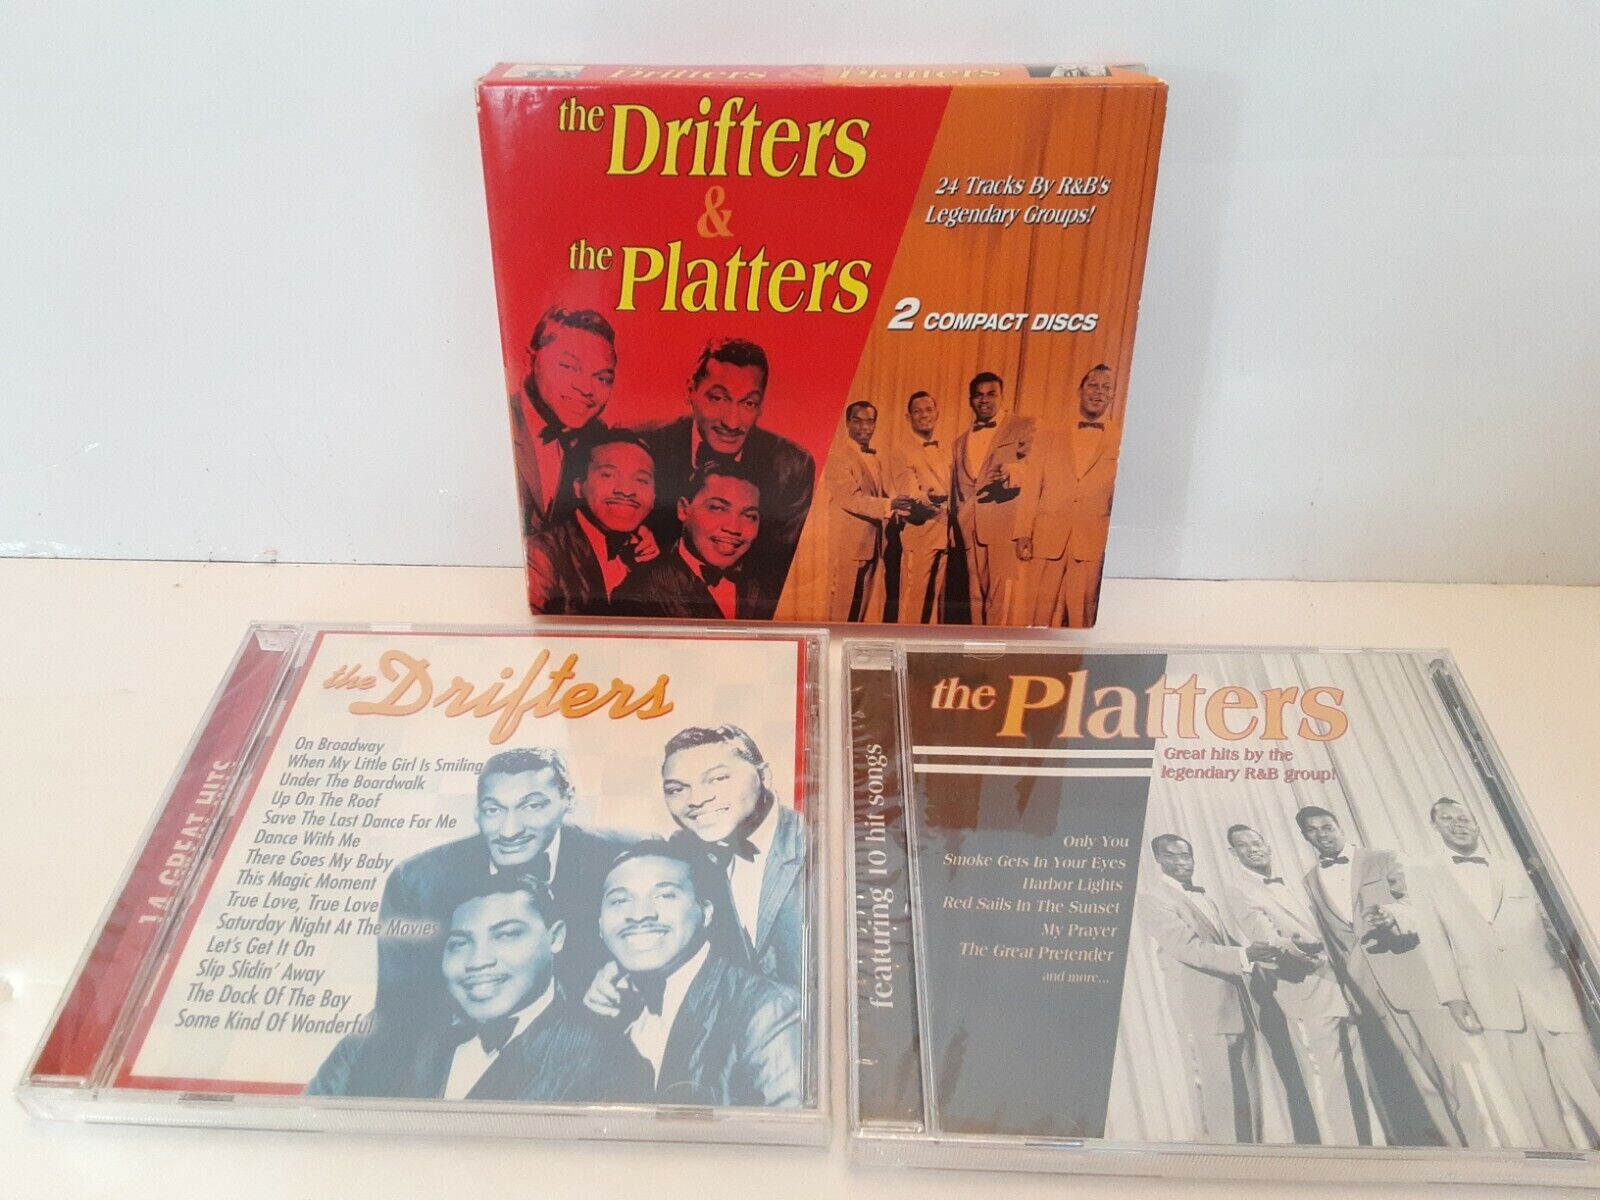 The Drifters & The Platters by The Drifters (US)/The Platters (CD, Nov-2001, Di…